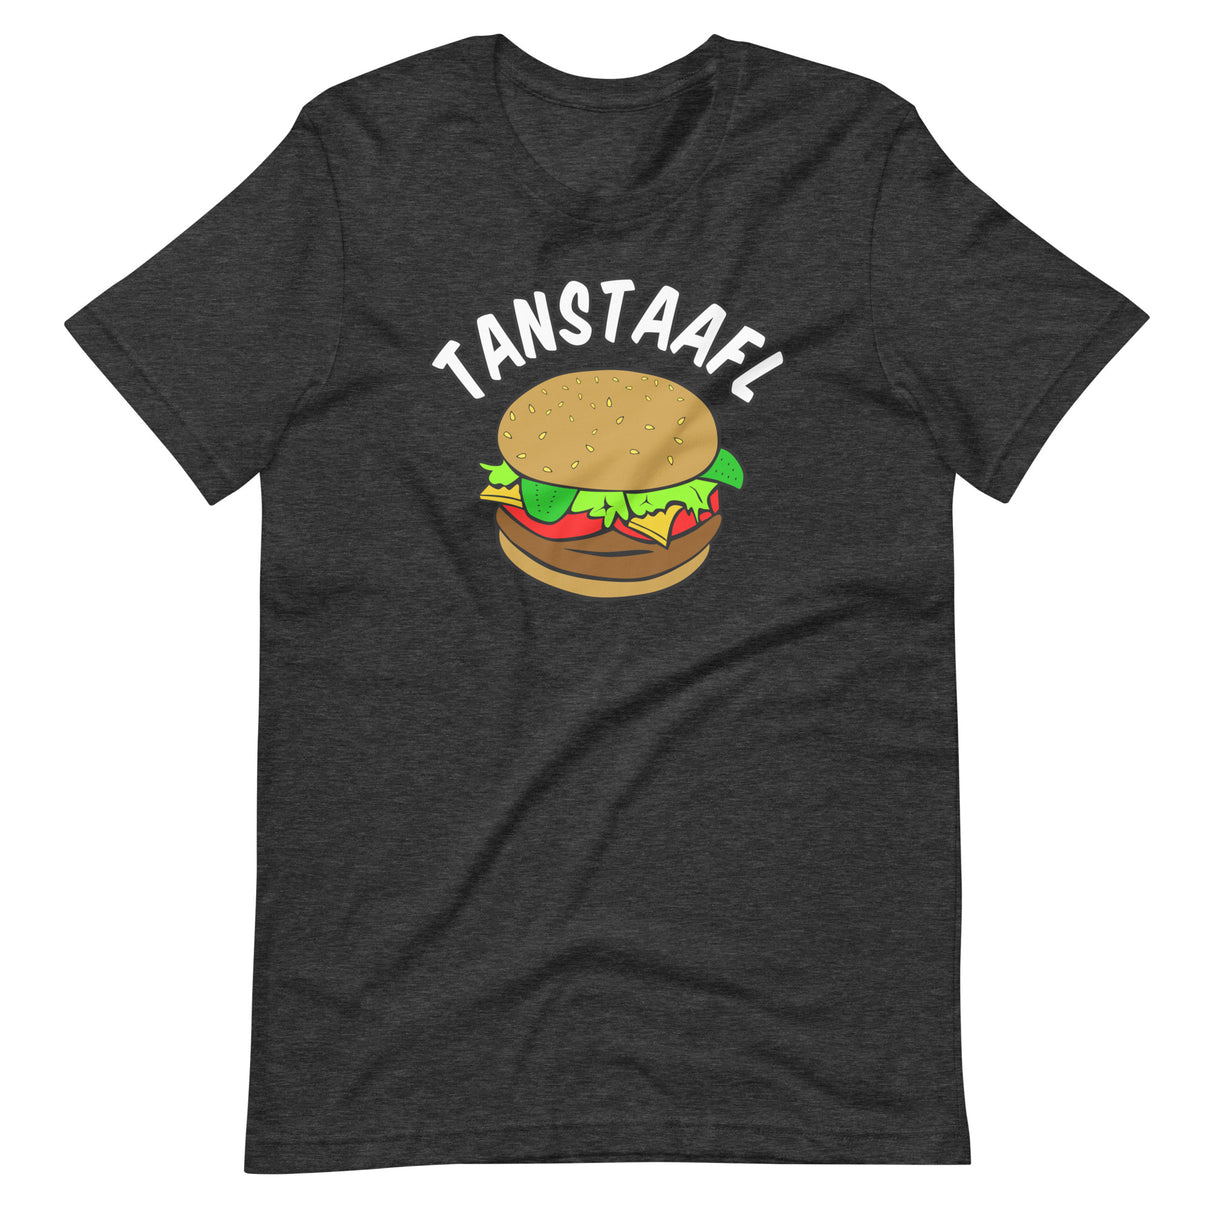 There Ain't No Such Thing as a Free Lunch Shirt